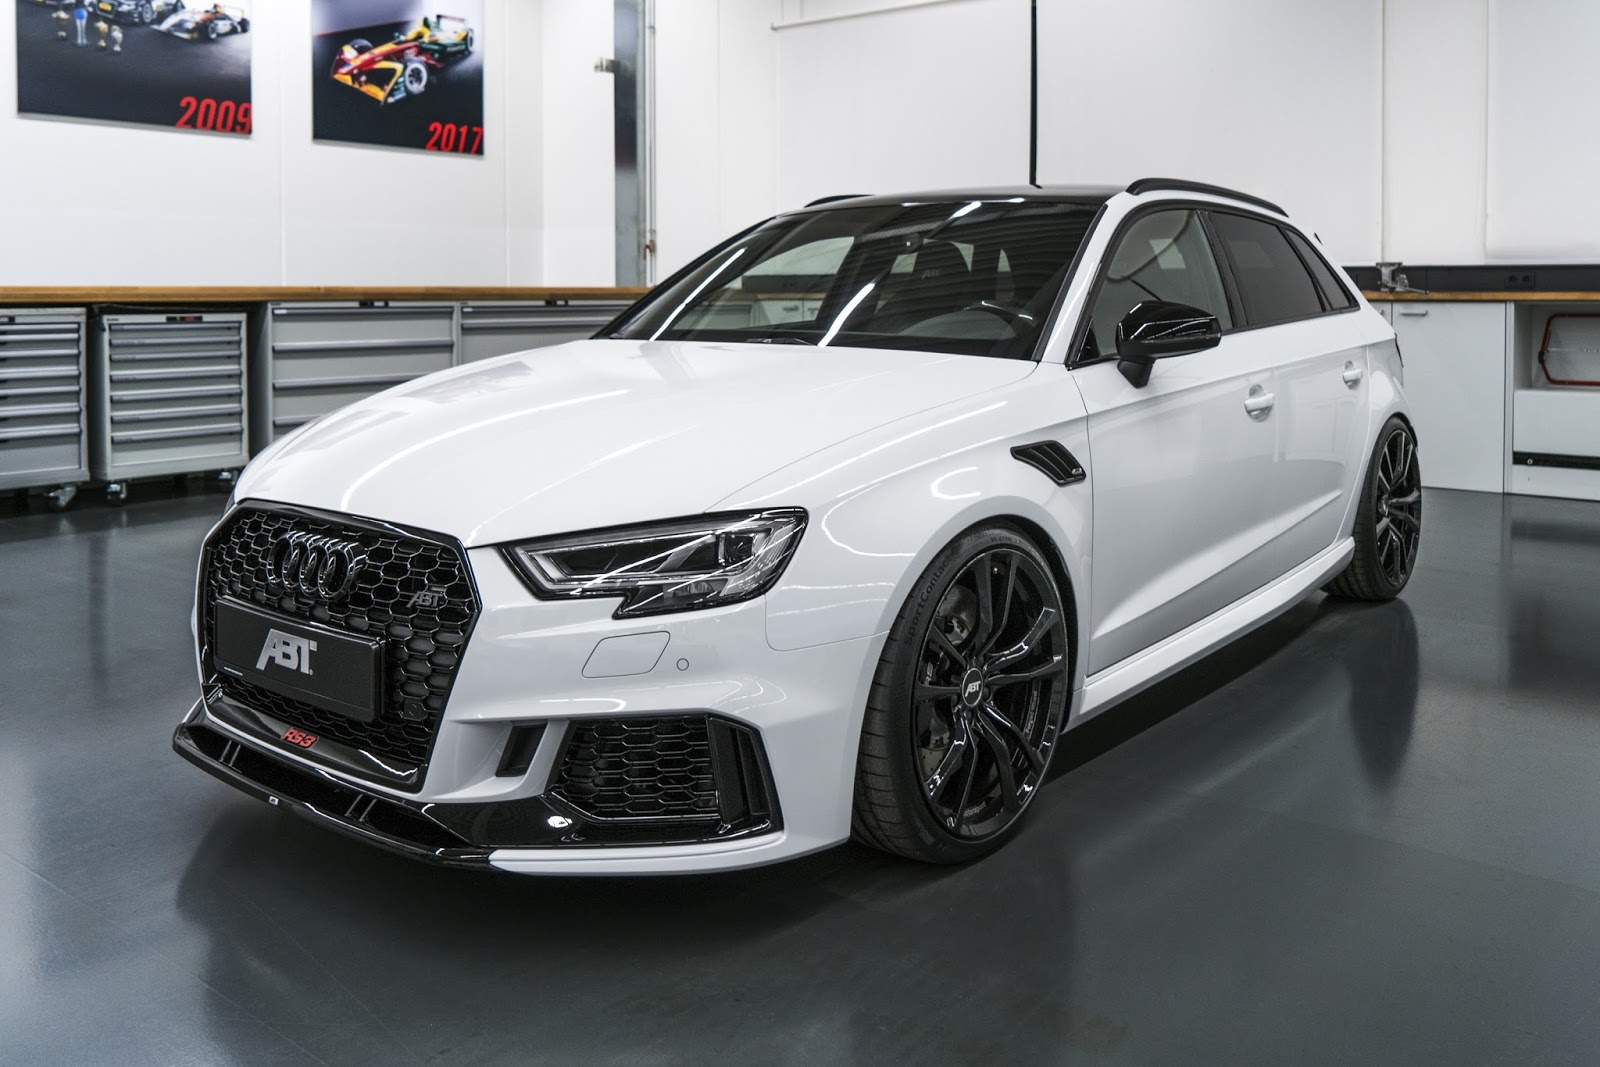 ABT's Audi RS3 Sportback Is A 500PS Monster-Hatch | Carscoops1600 x 1067